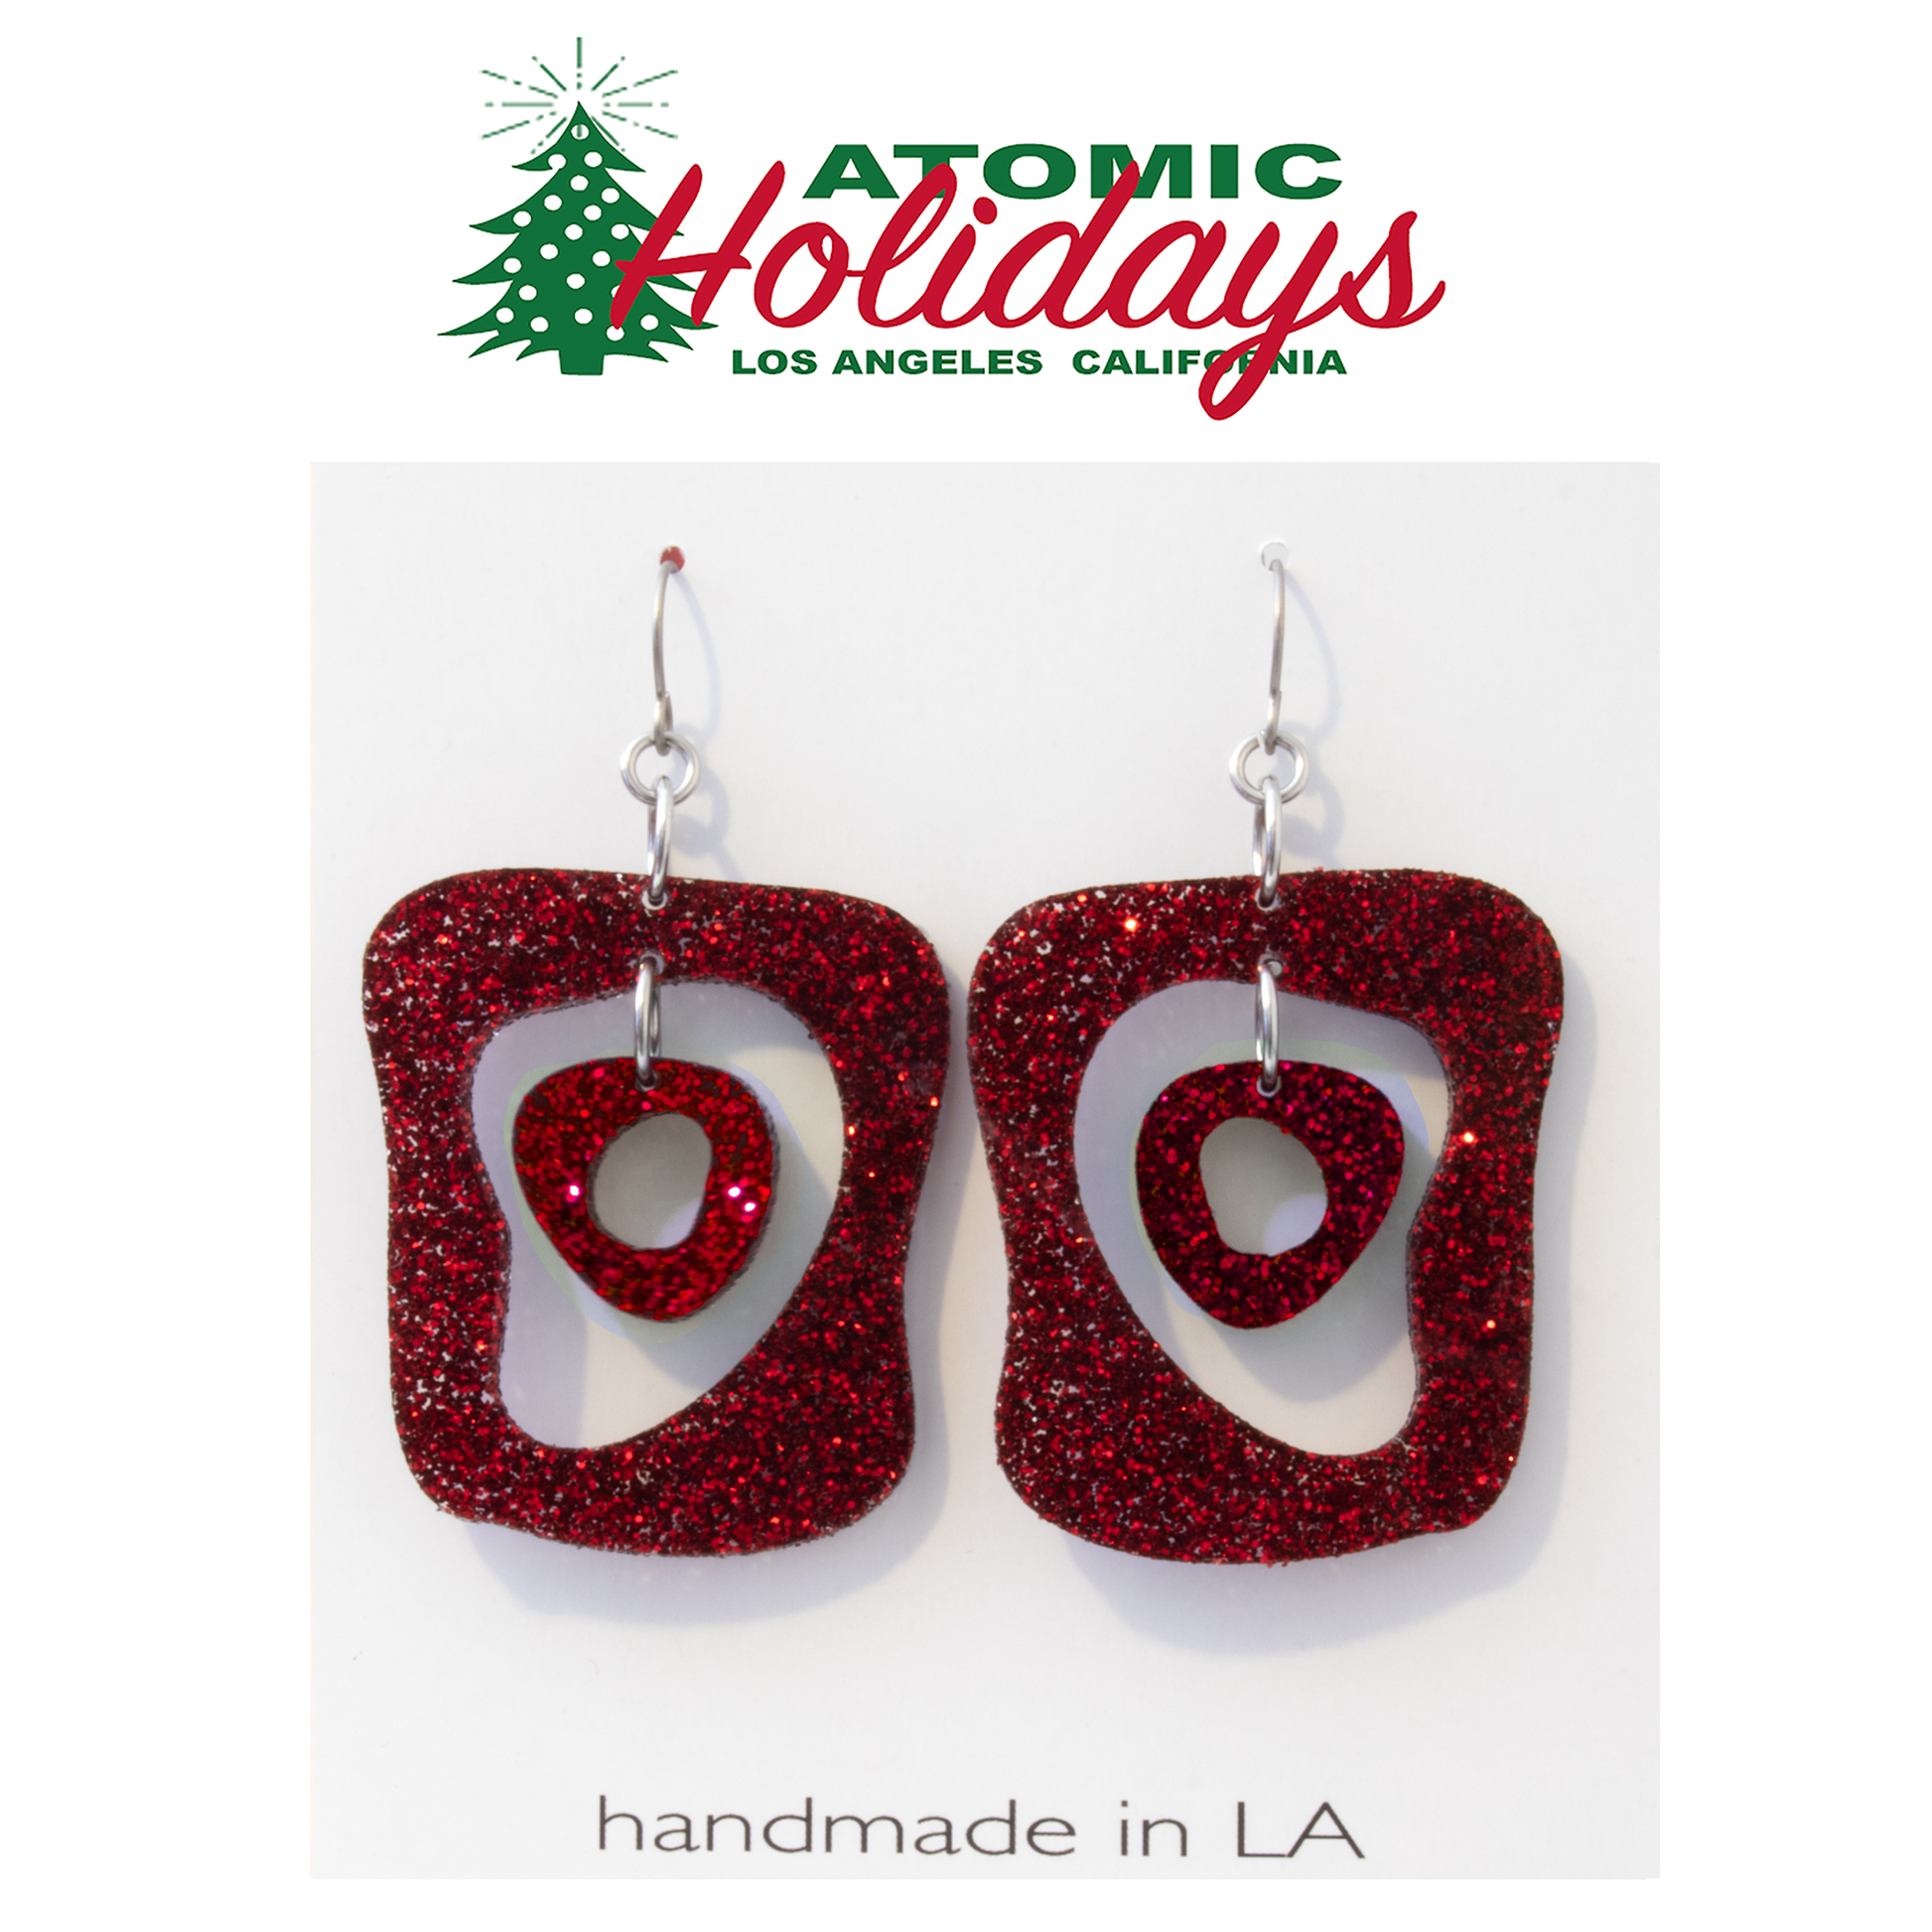 Atomic Holidays Mid Mod Statement Earrings in glitter red made in Los Angeles by AtomicMobiles.com